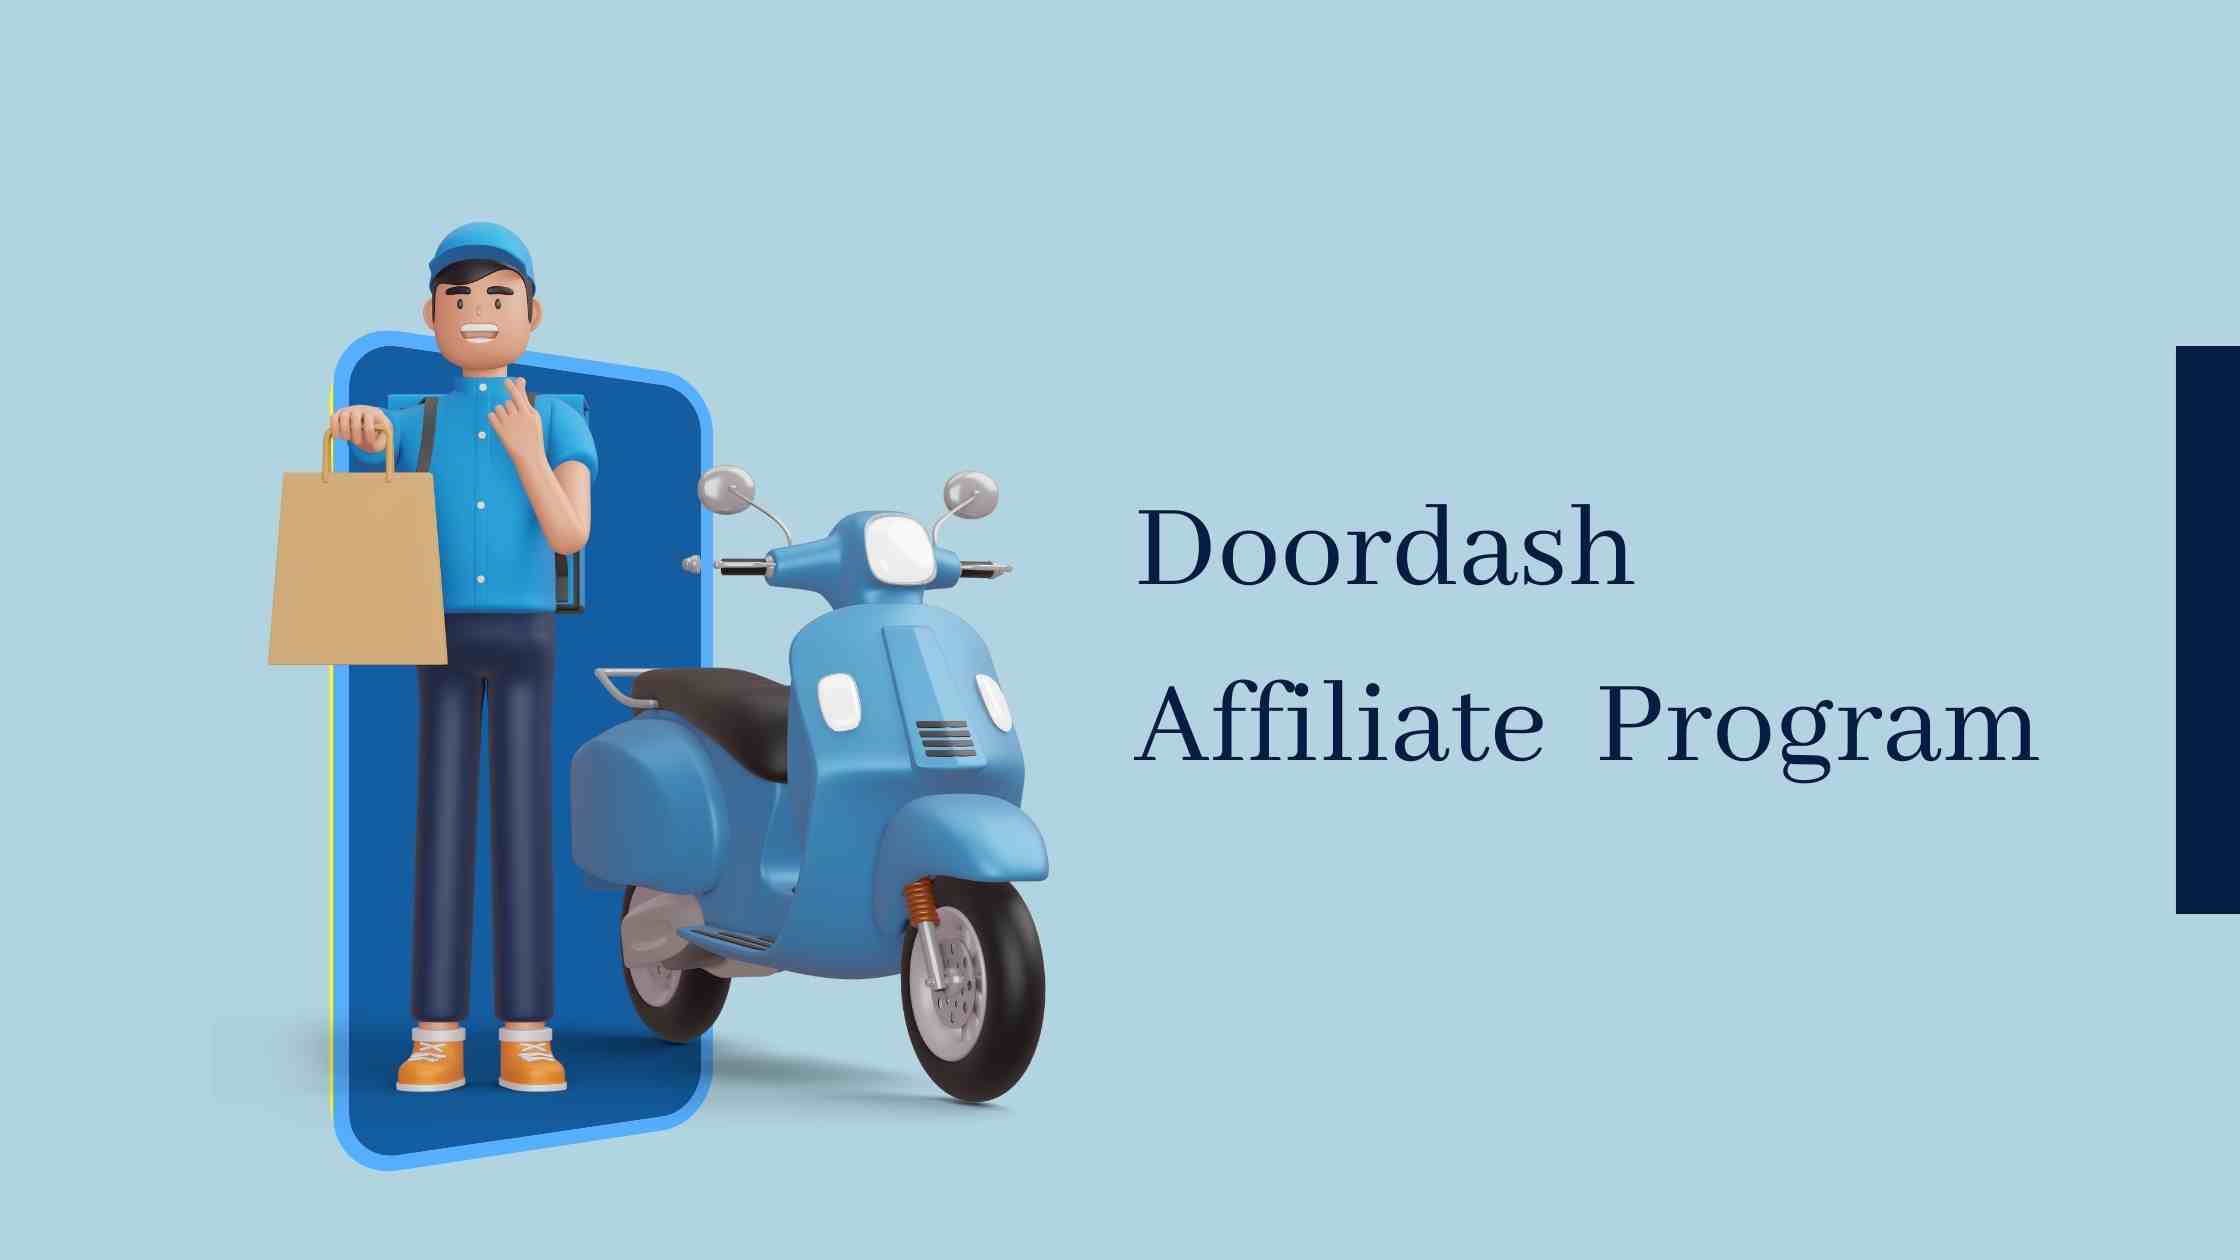 DoorDash is looking to bring in new customers by promoting its customer acquisition affiliate program.